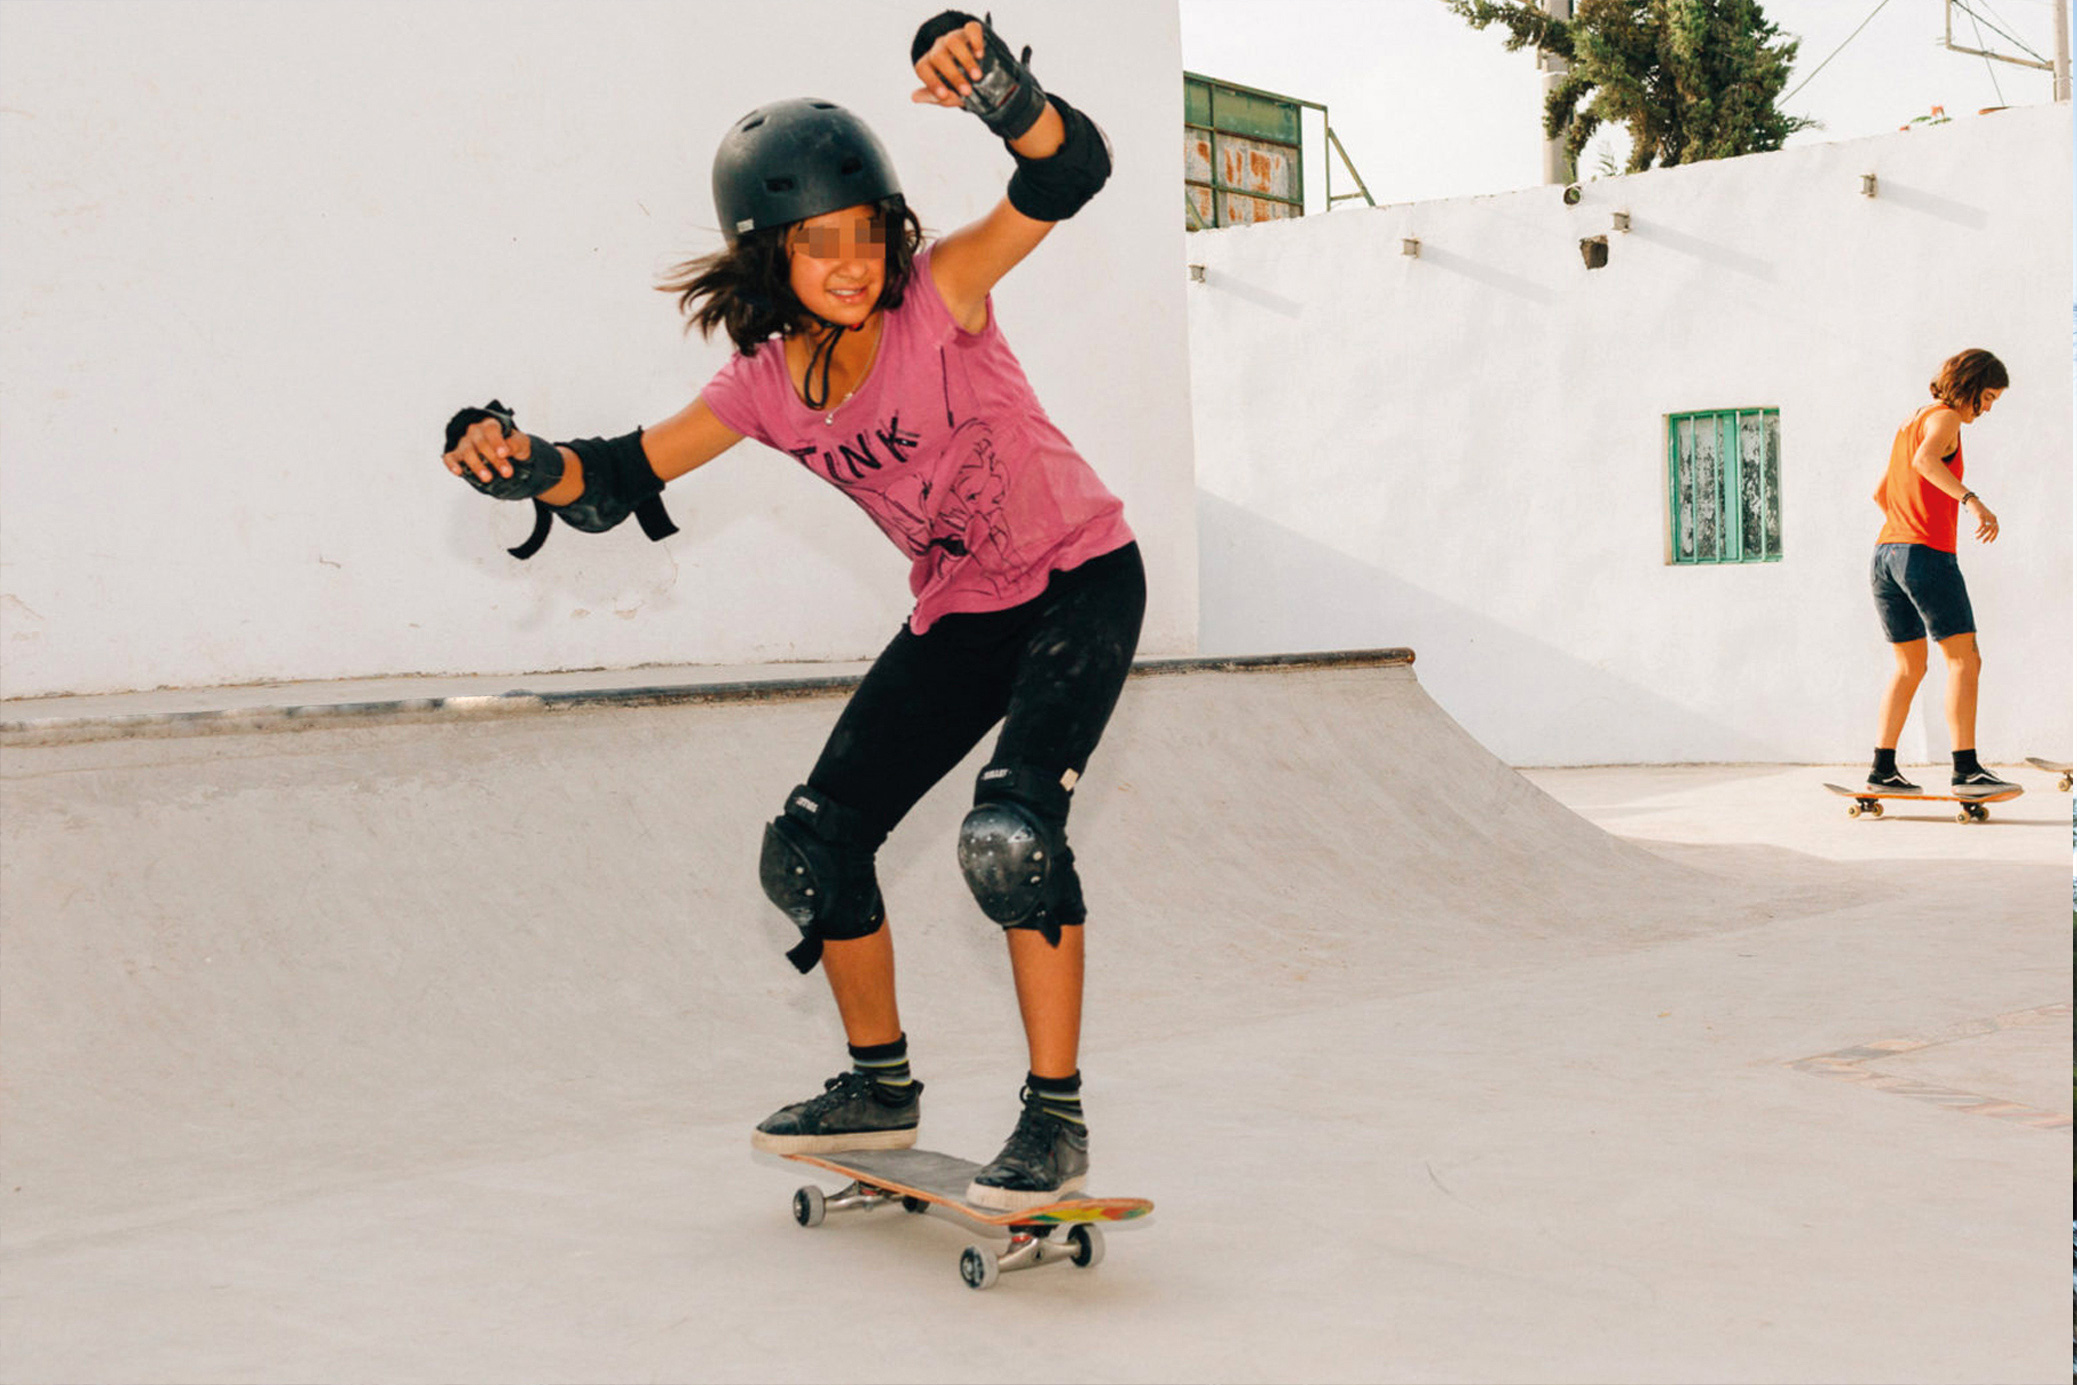 How can skateboarding improve brain functioning and help to regulate emotions?